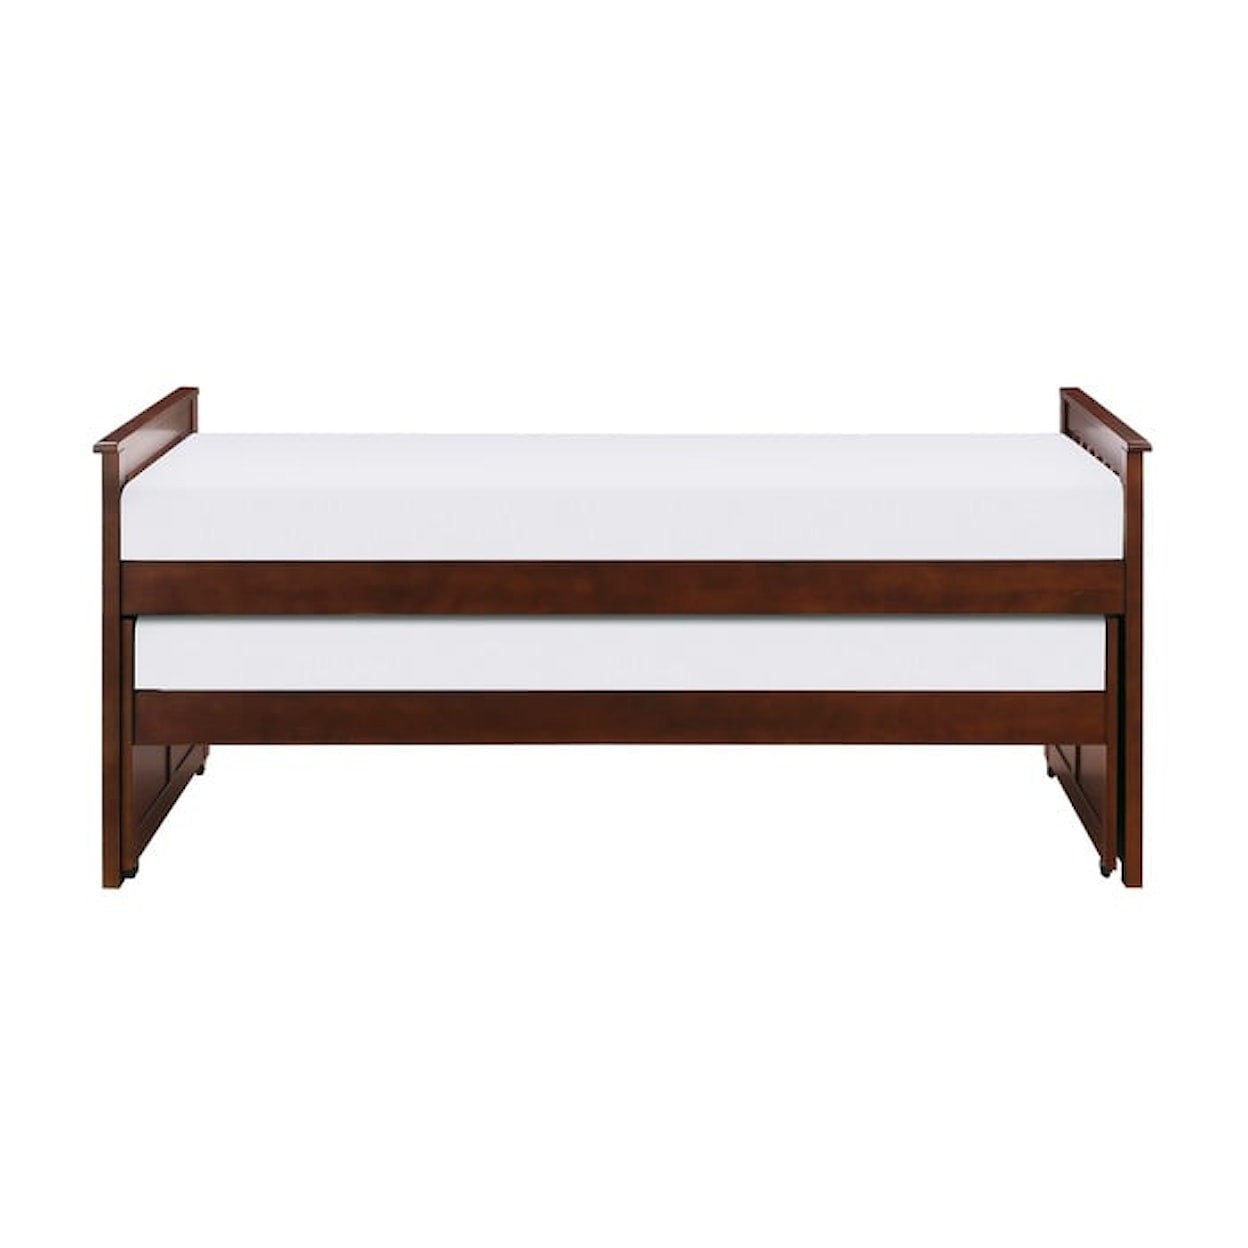 Homelegance Furniture Discovery Twin/Twin Bed